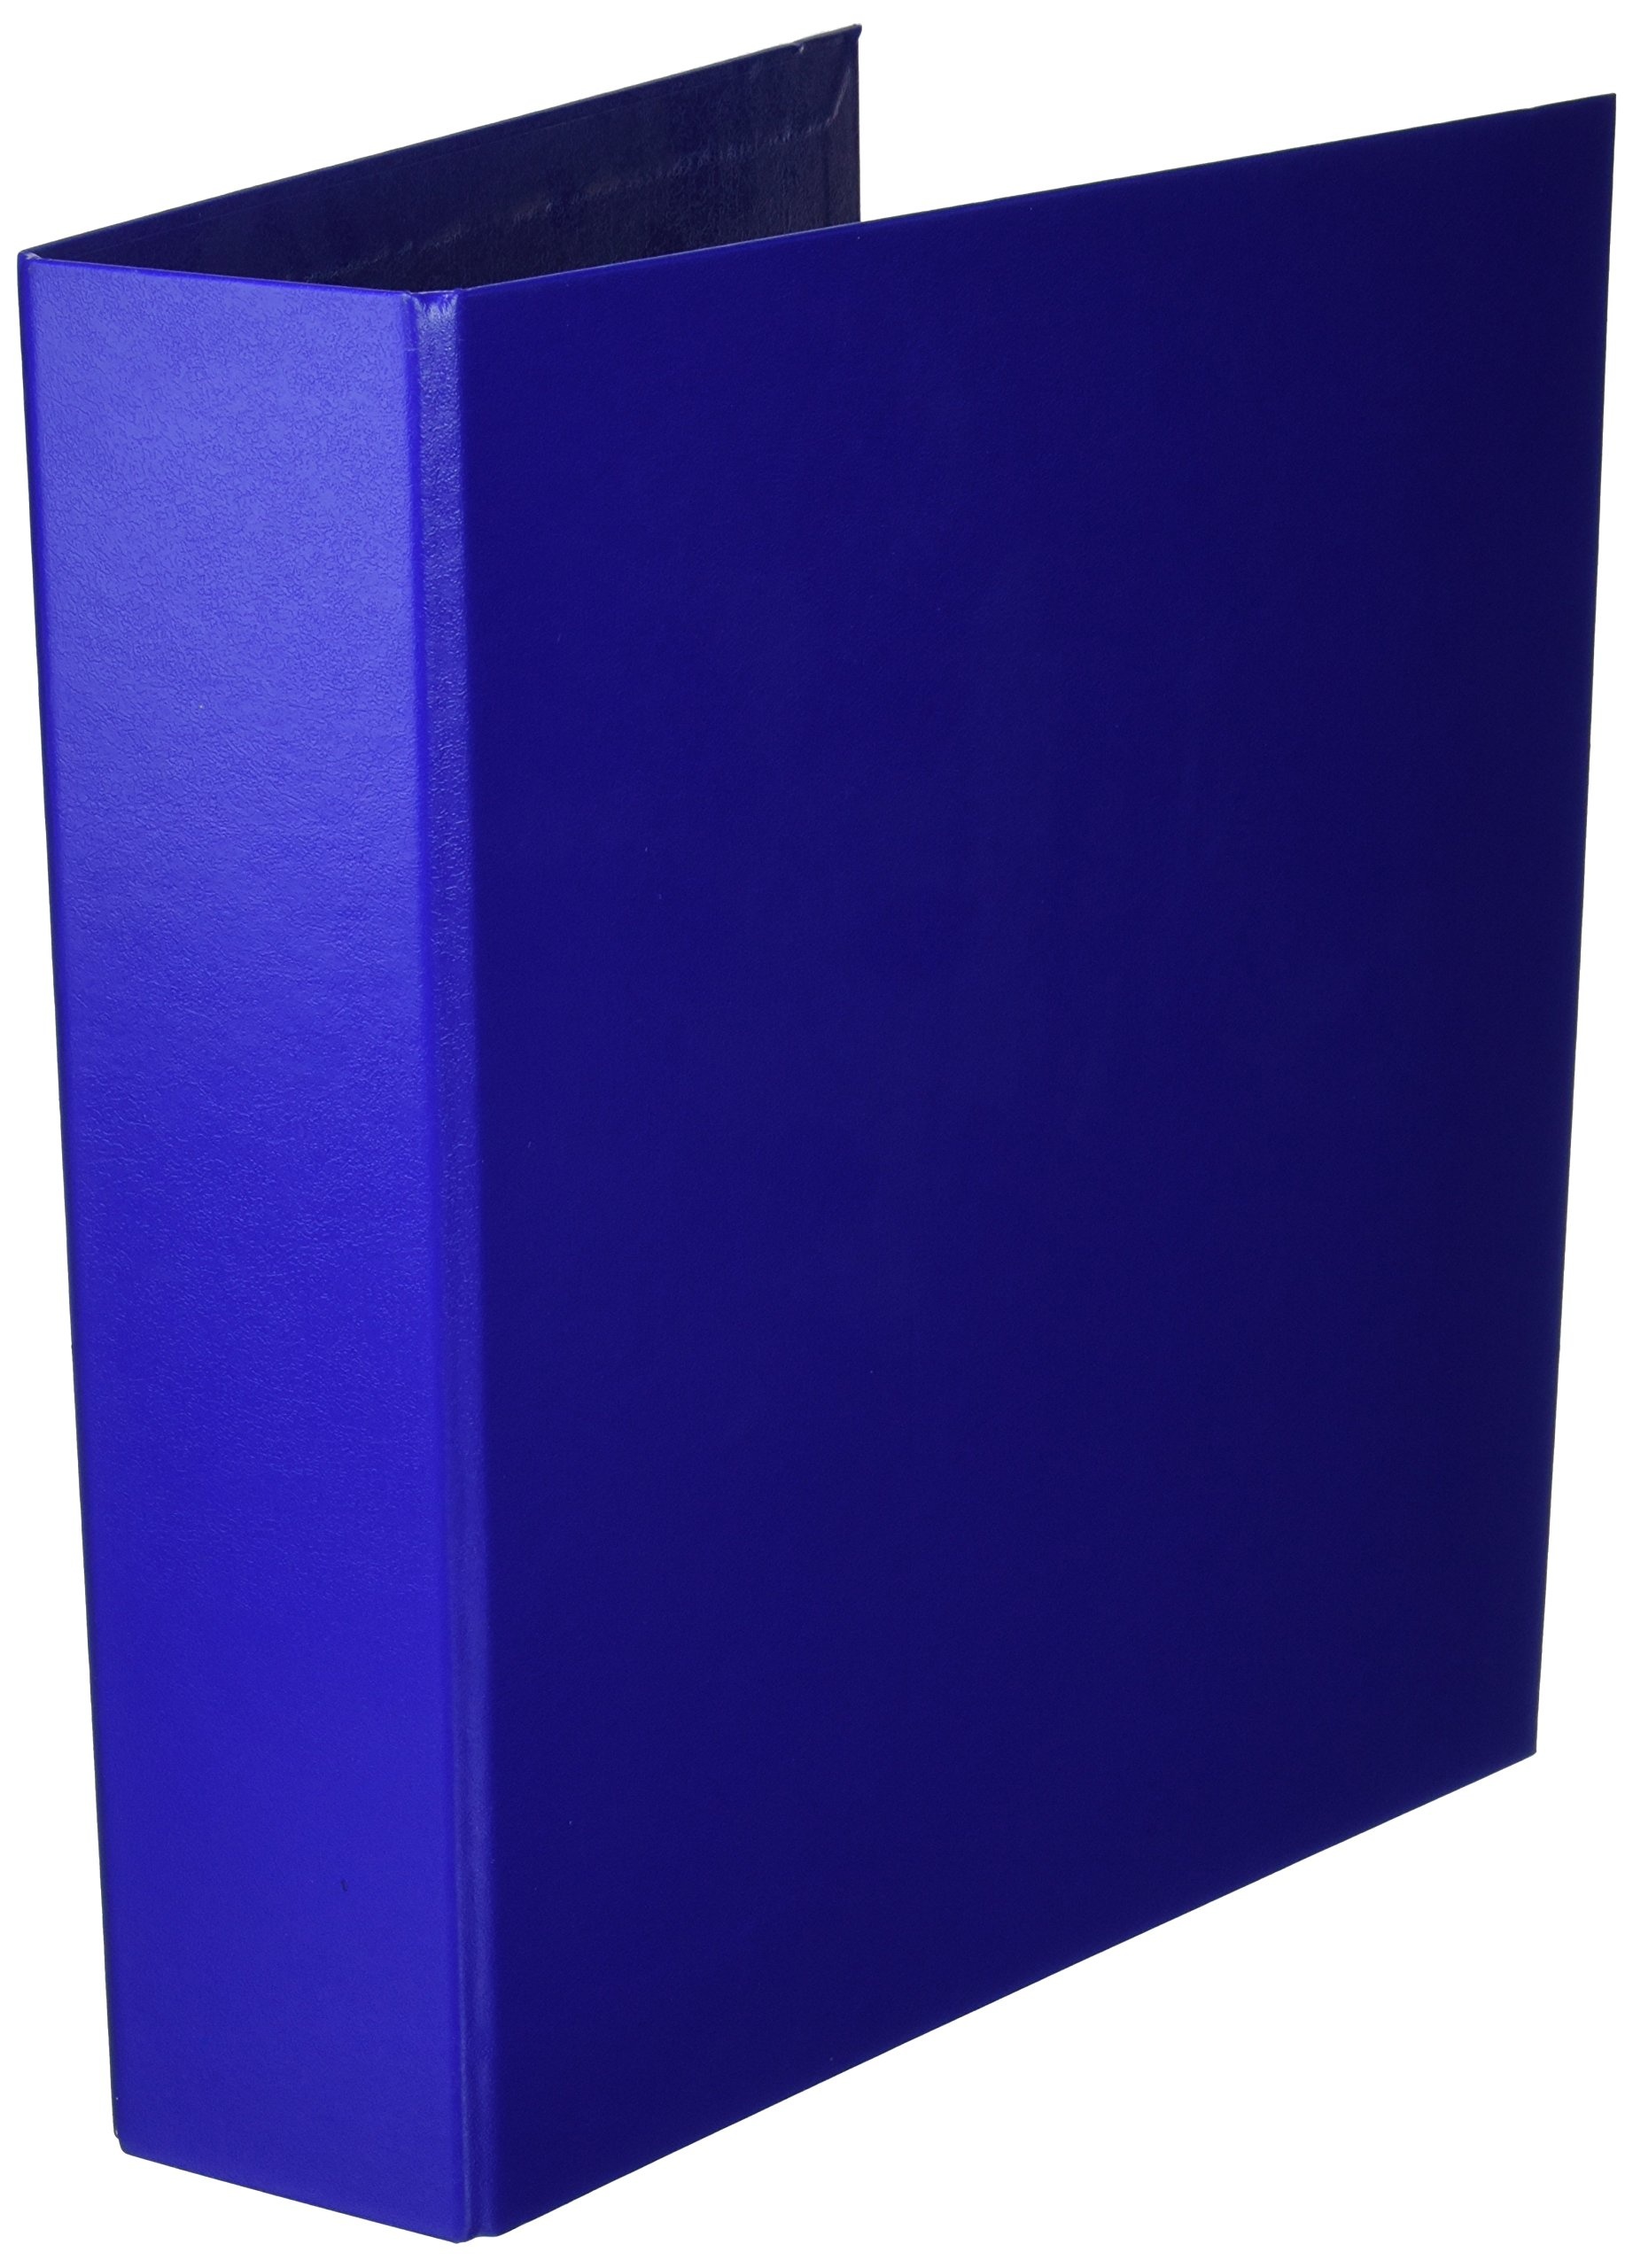 NETTUNO 50 A4 2D BLU Ring binders made of Stratopan-P, fully PP-covered cardboard, with 2 or 4 rings, round, D mit square and an inner pocket, schwarz